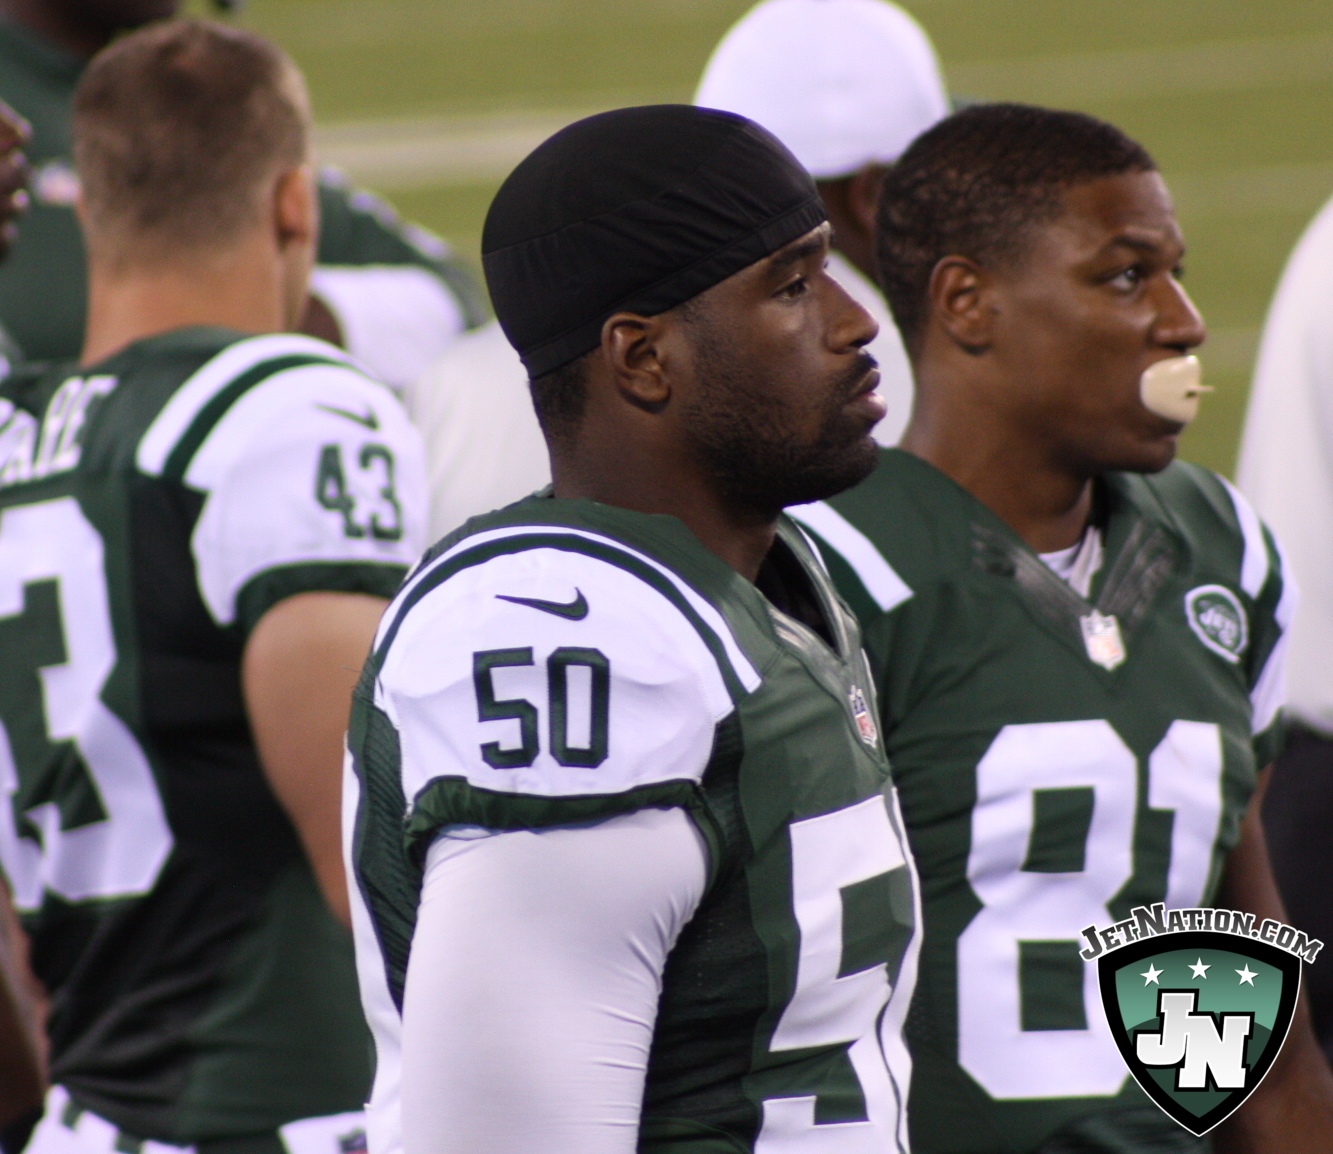 The undrafted Barnes stuck on the Jets practice squad in 2015.